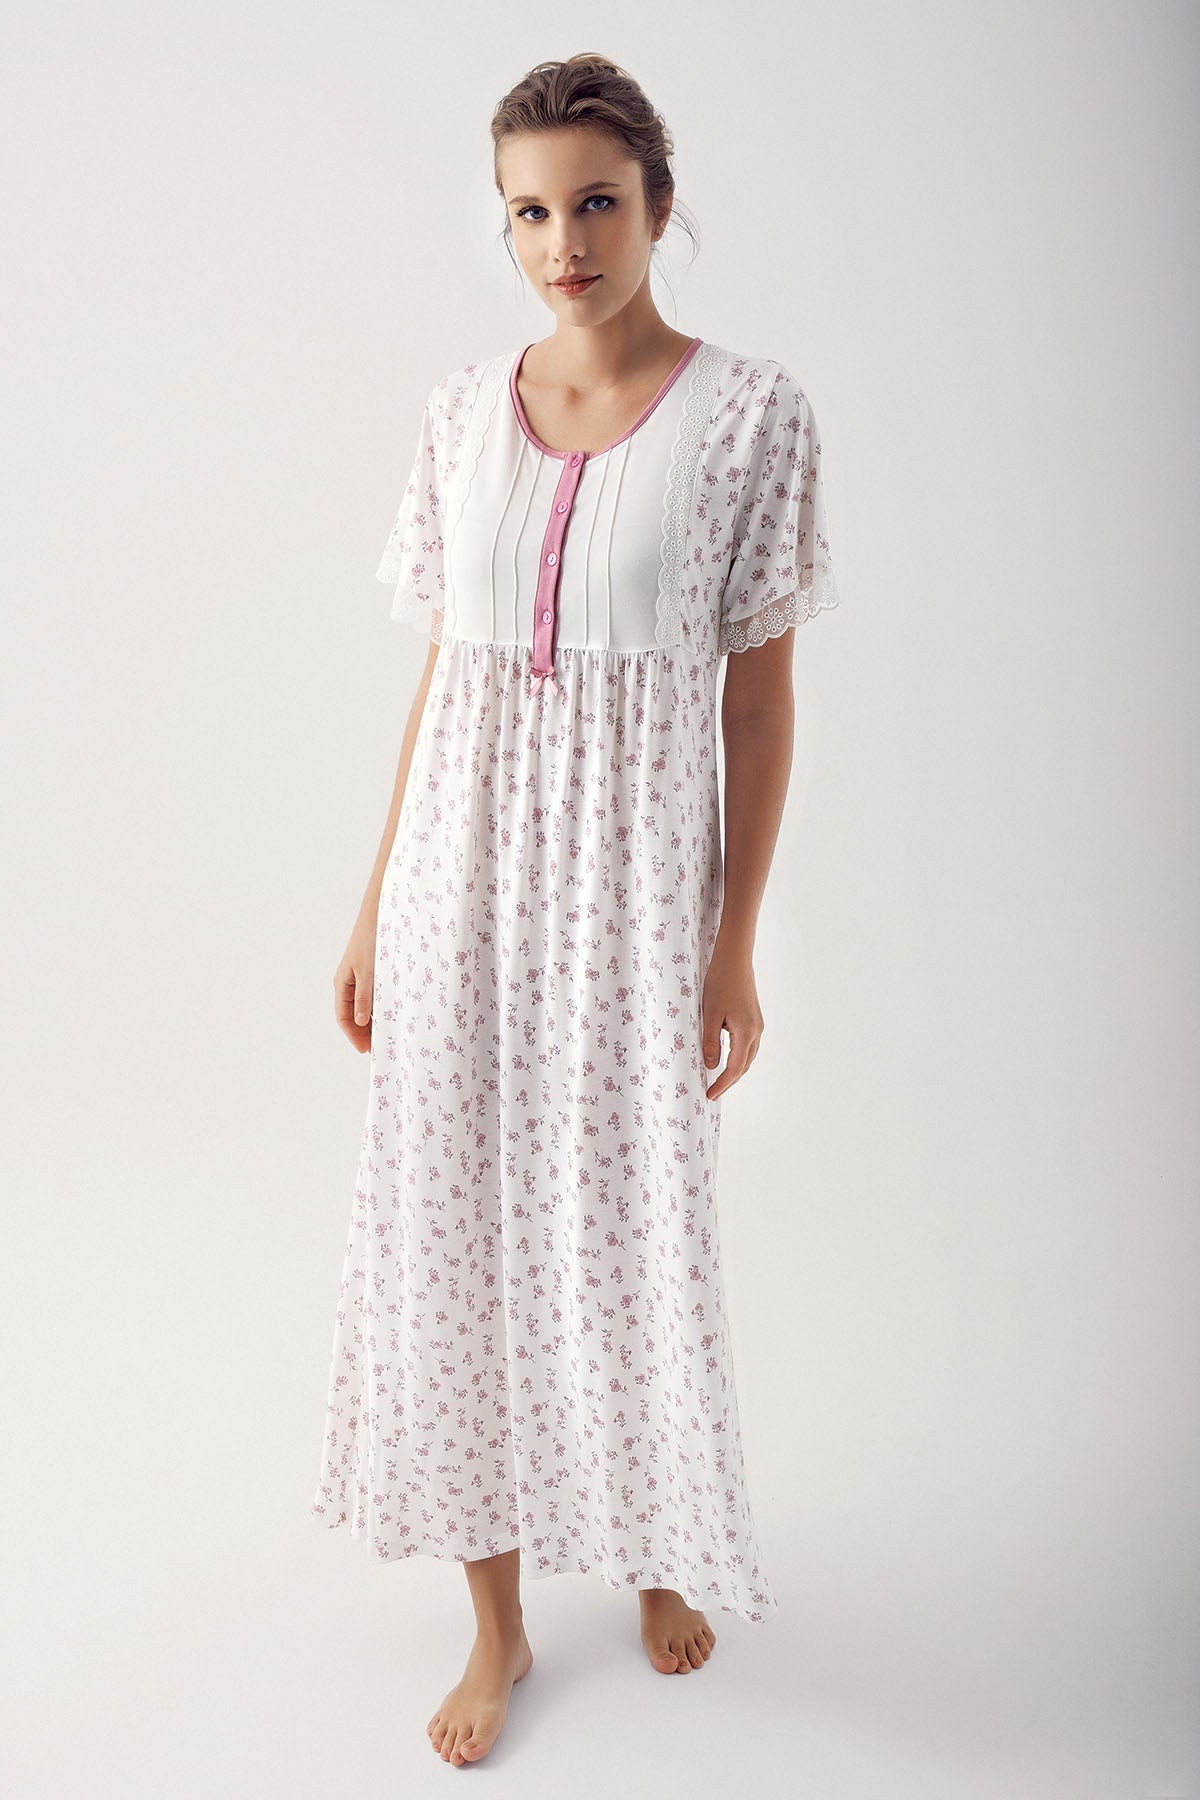 Flower Pattern Lace Plus Size Maternity & Nursing Nightgown Dried Rose - 14113